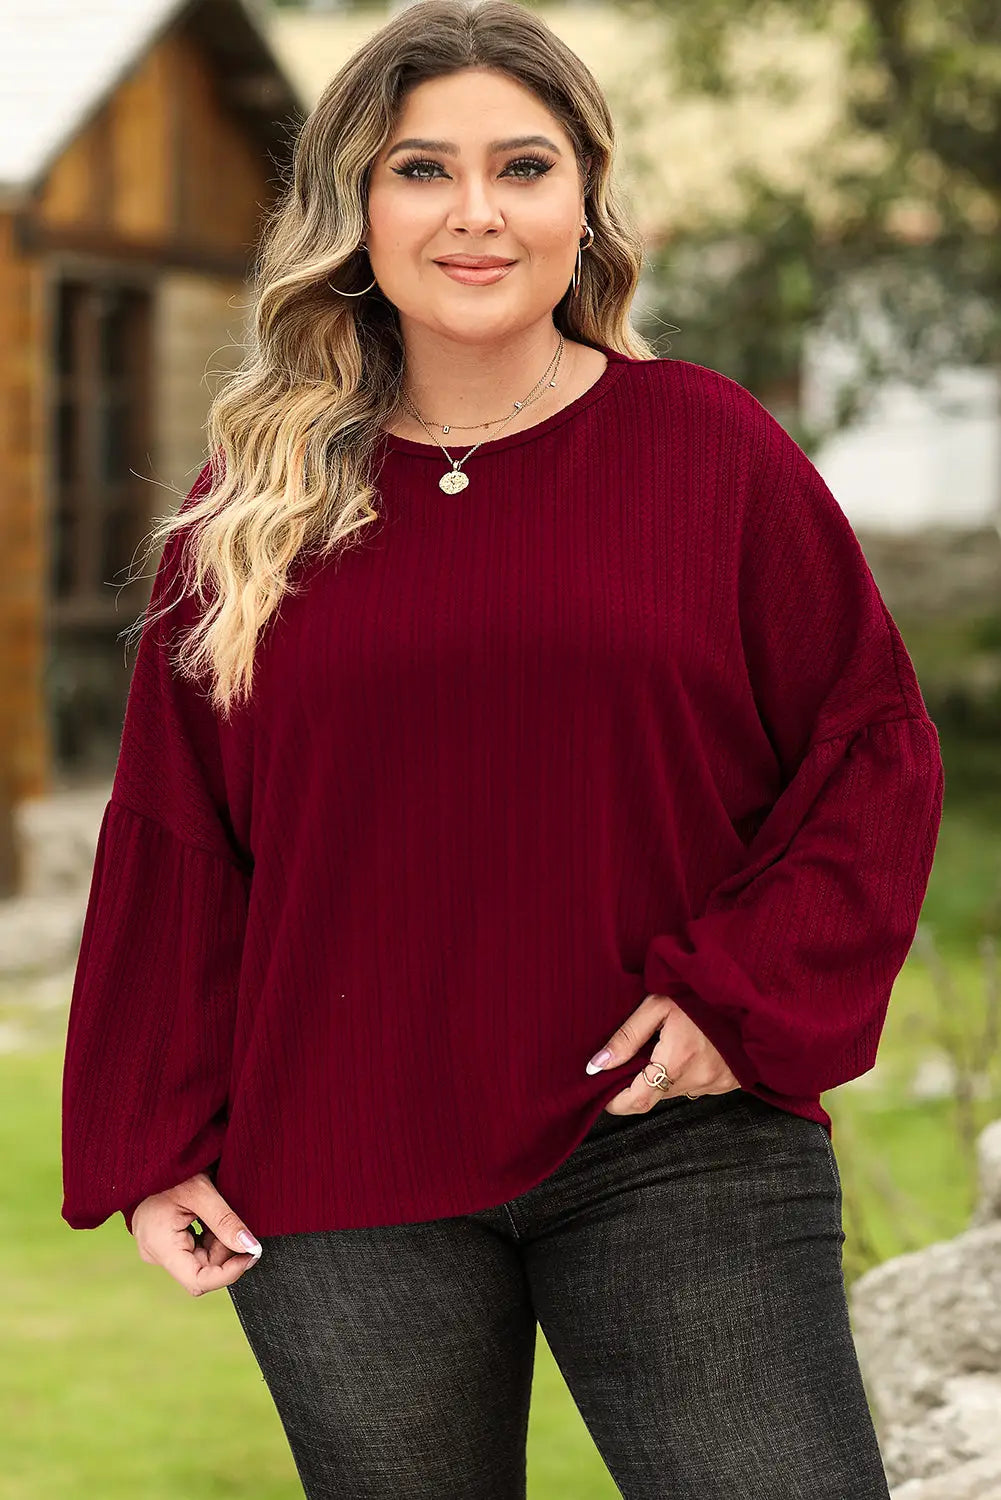 Red dahlia mardi gras sequin patched textured knit plus size top - dahlia1 / 1x 95% polyester + 5% elastane graphic